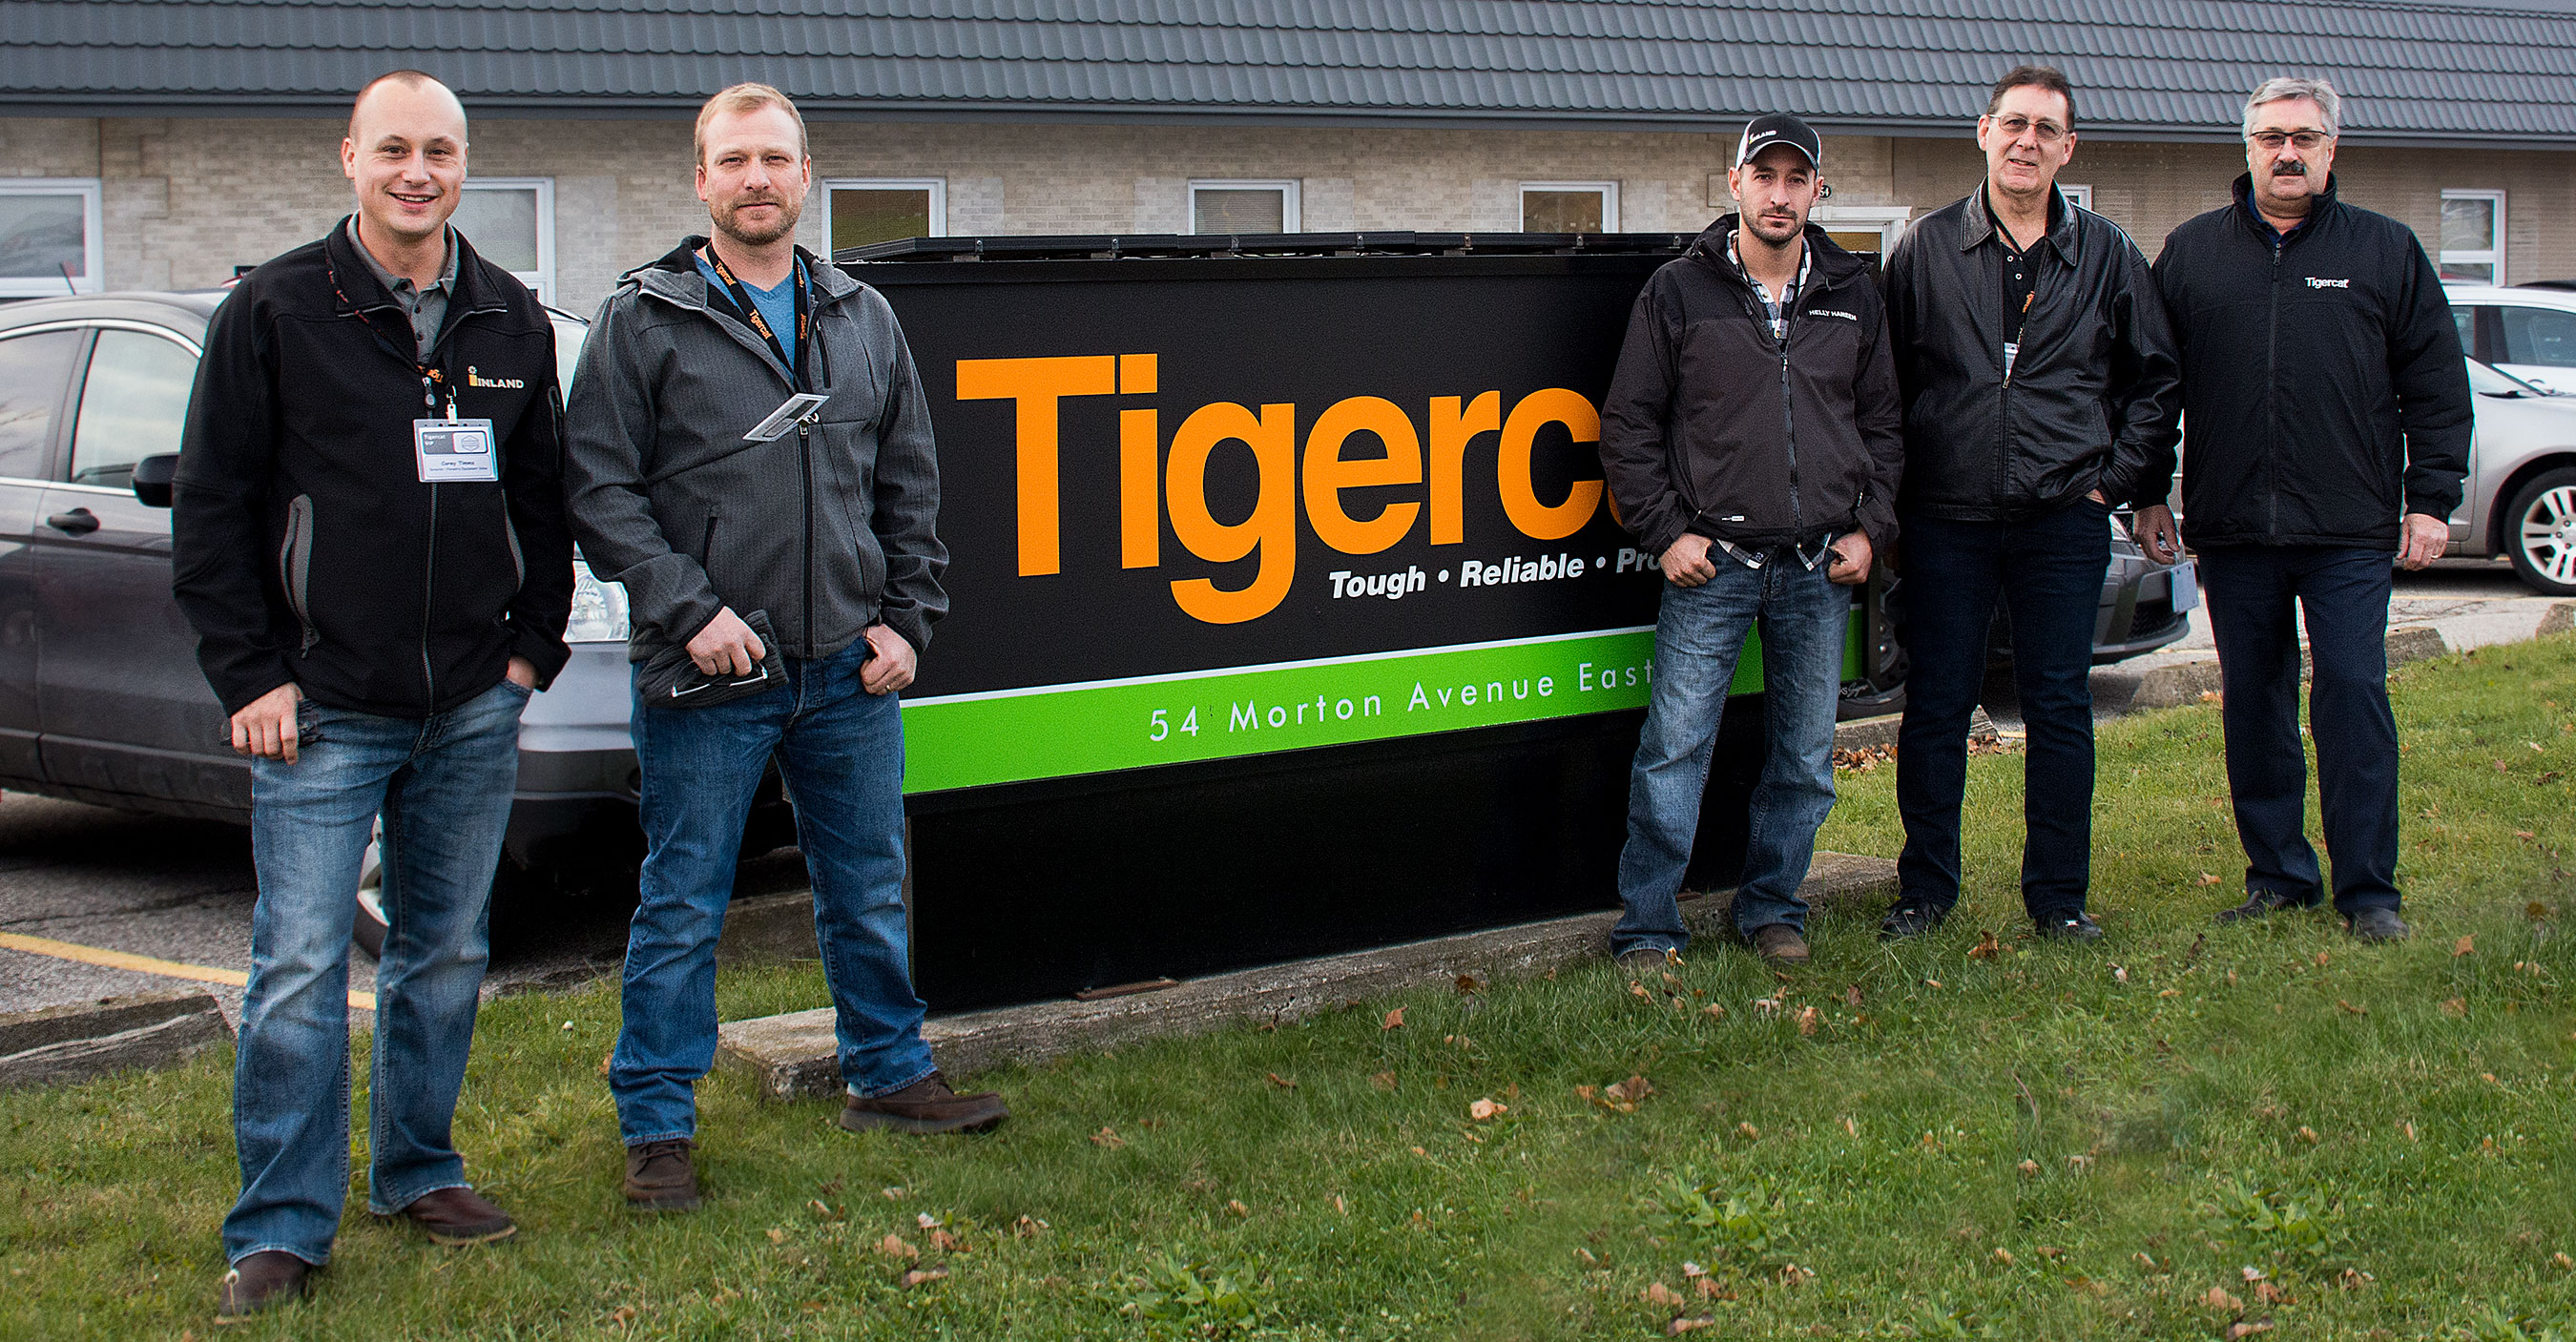 (L-R): Corey Timms, director of forestry equipment sales at Inland; Ben Shortreed, owner of Short Trees Ltd.; Derek Lamothe, owner of Firecat Contracting; Doug Parchomchuk, Inland sales specialist; Ron Montgomery, Tigercat Canadian sales manager.